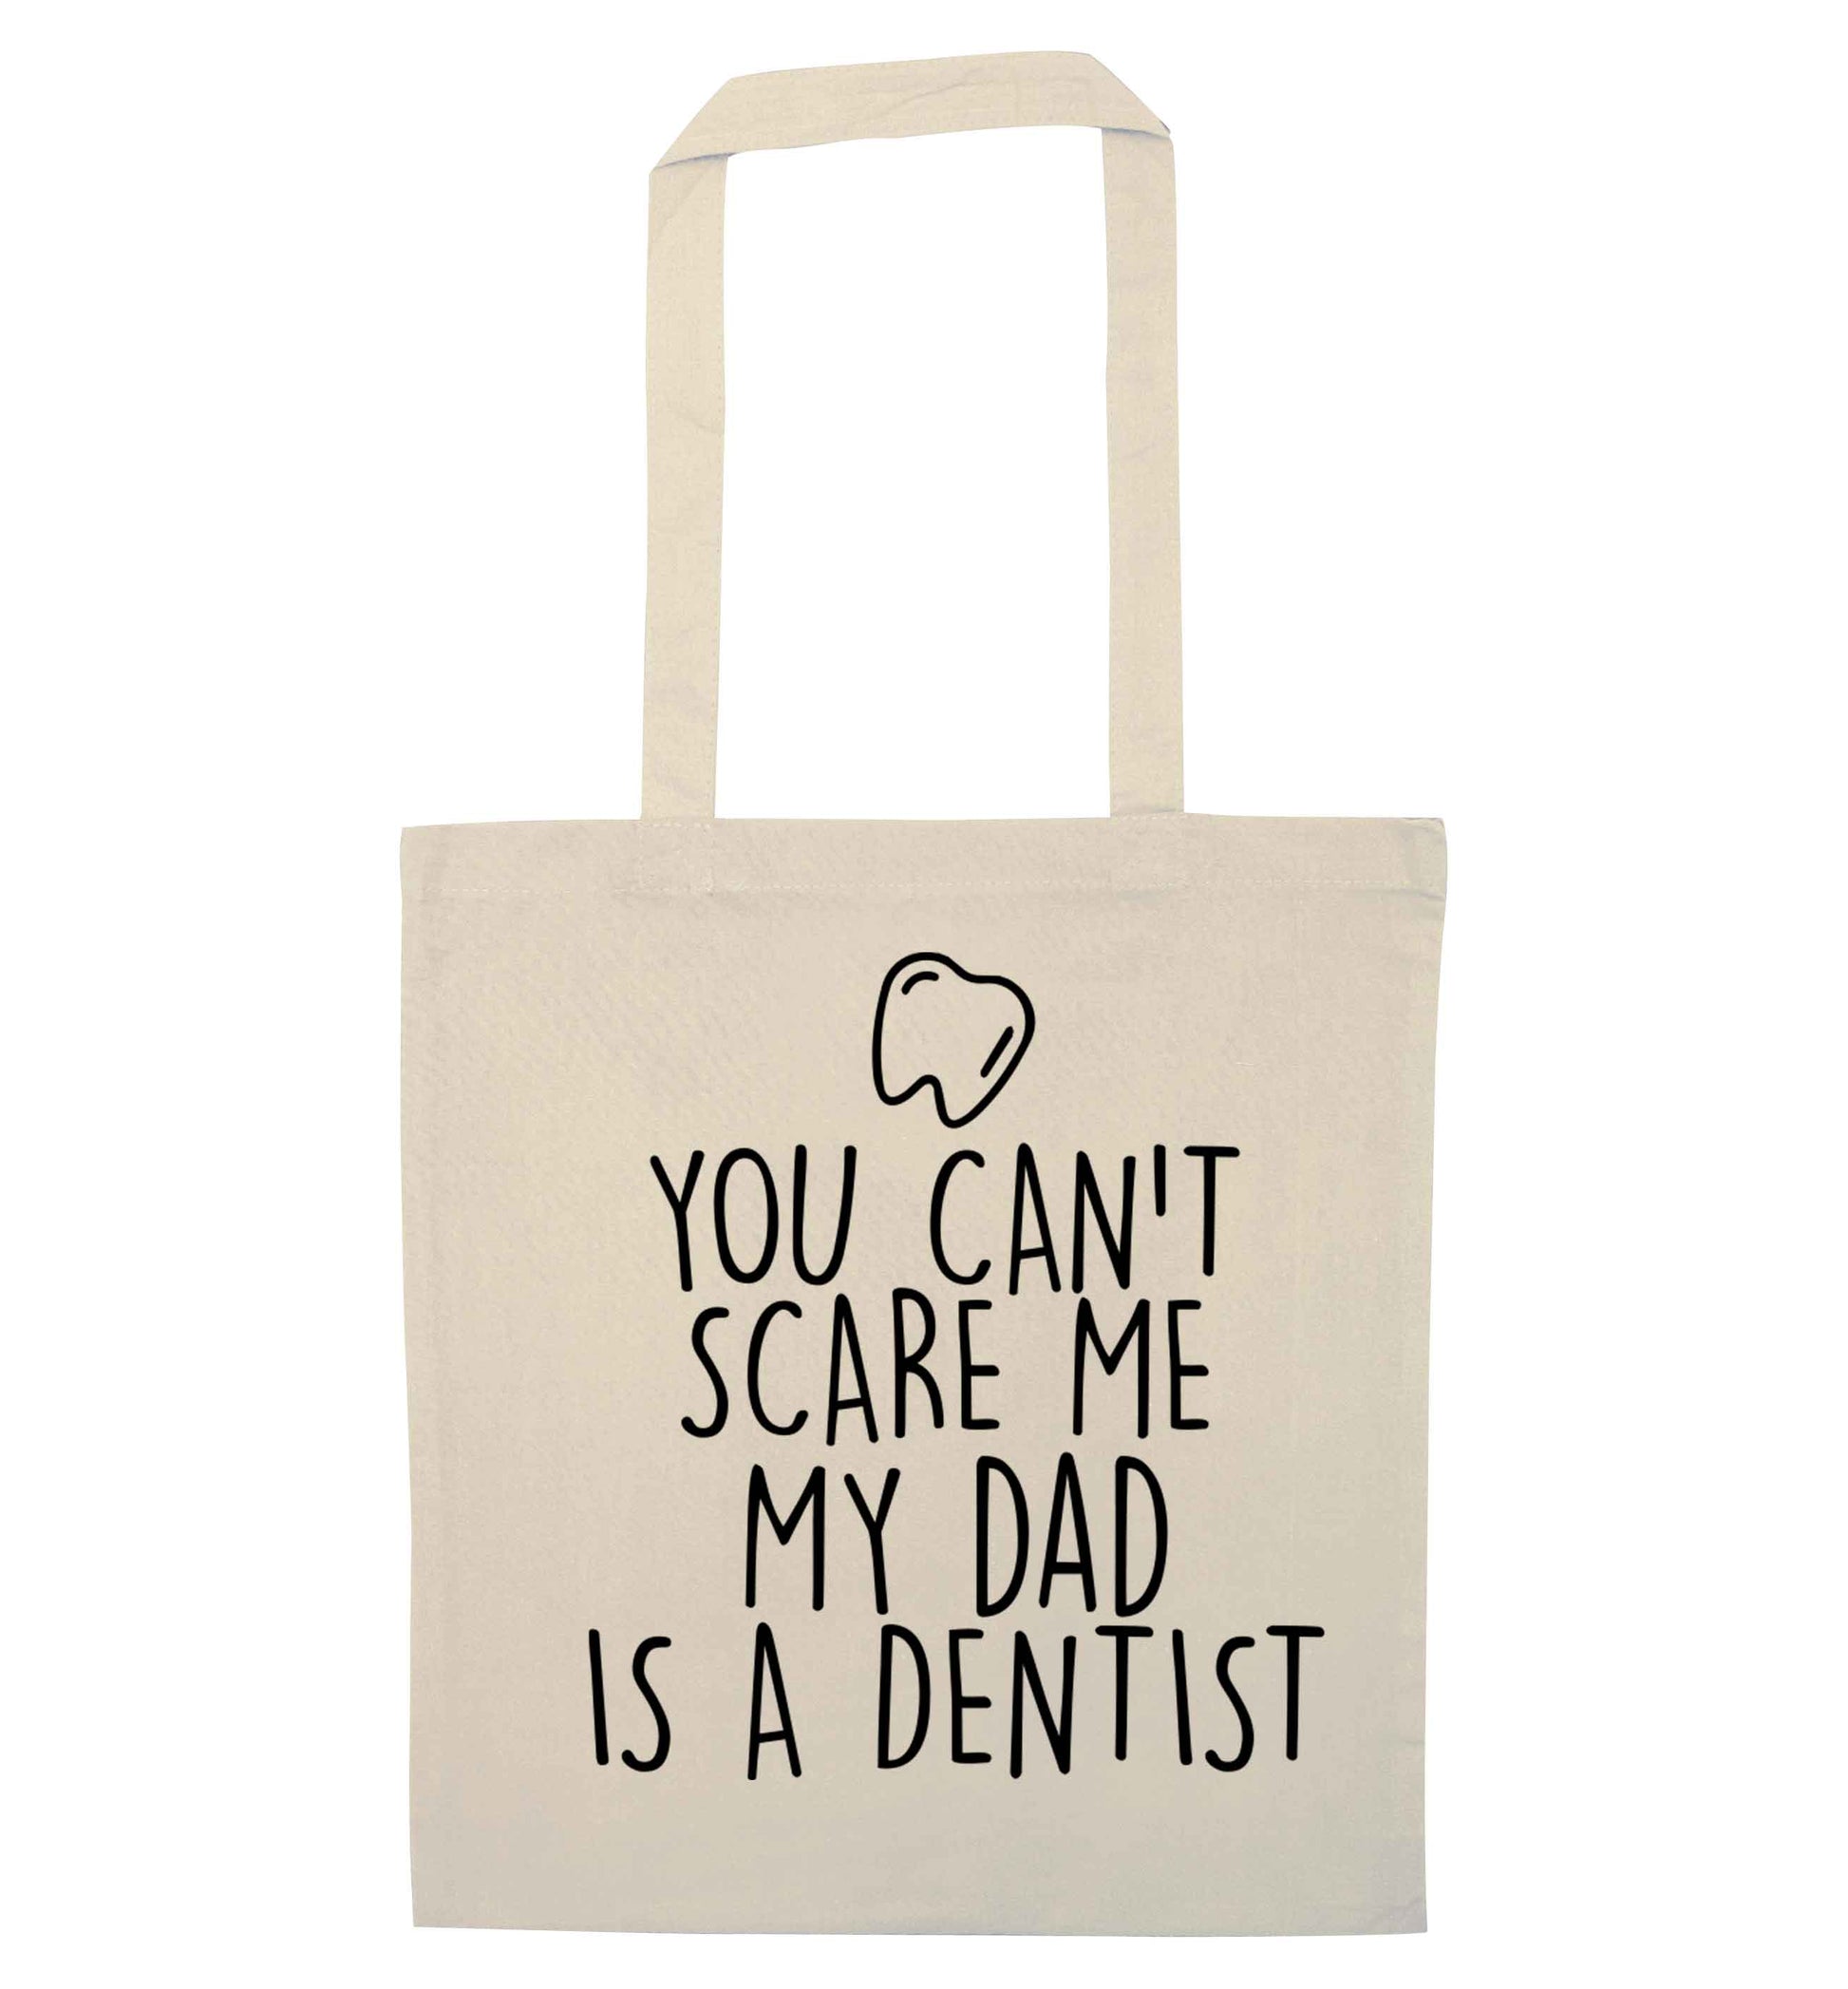 You can't scare me my dad is a dentist natural tote bag